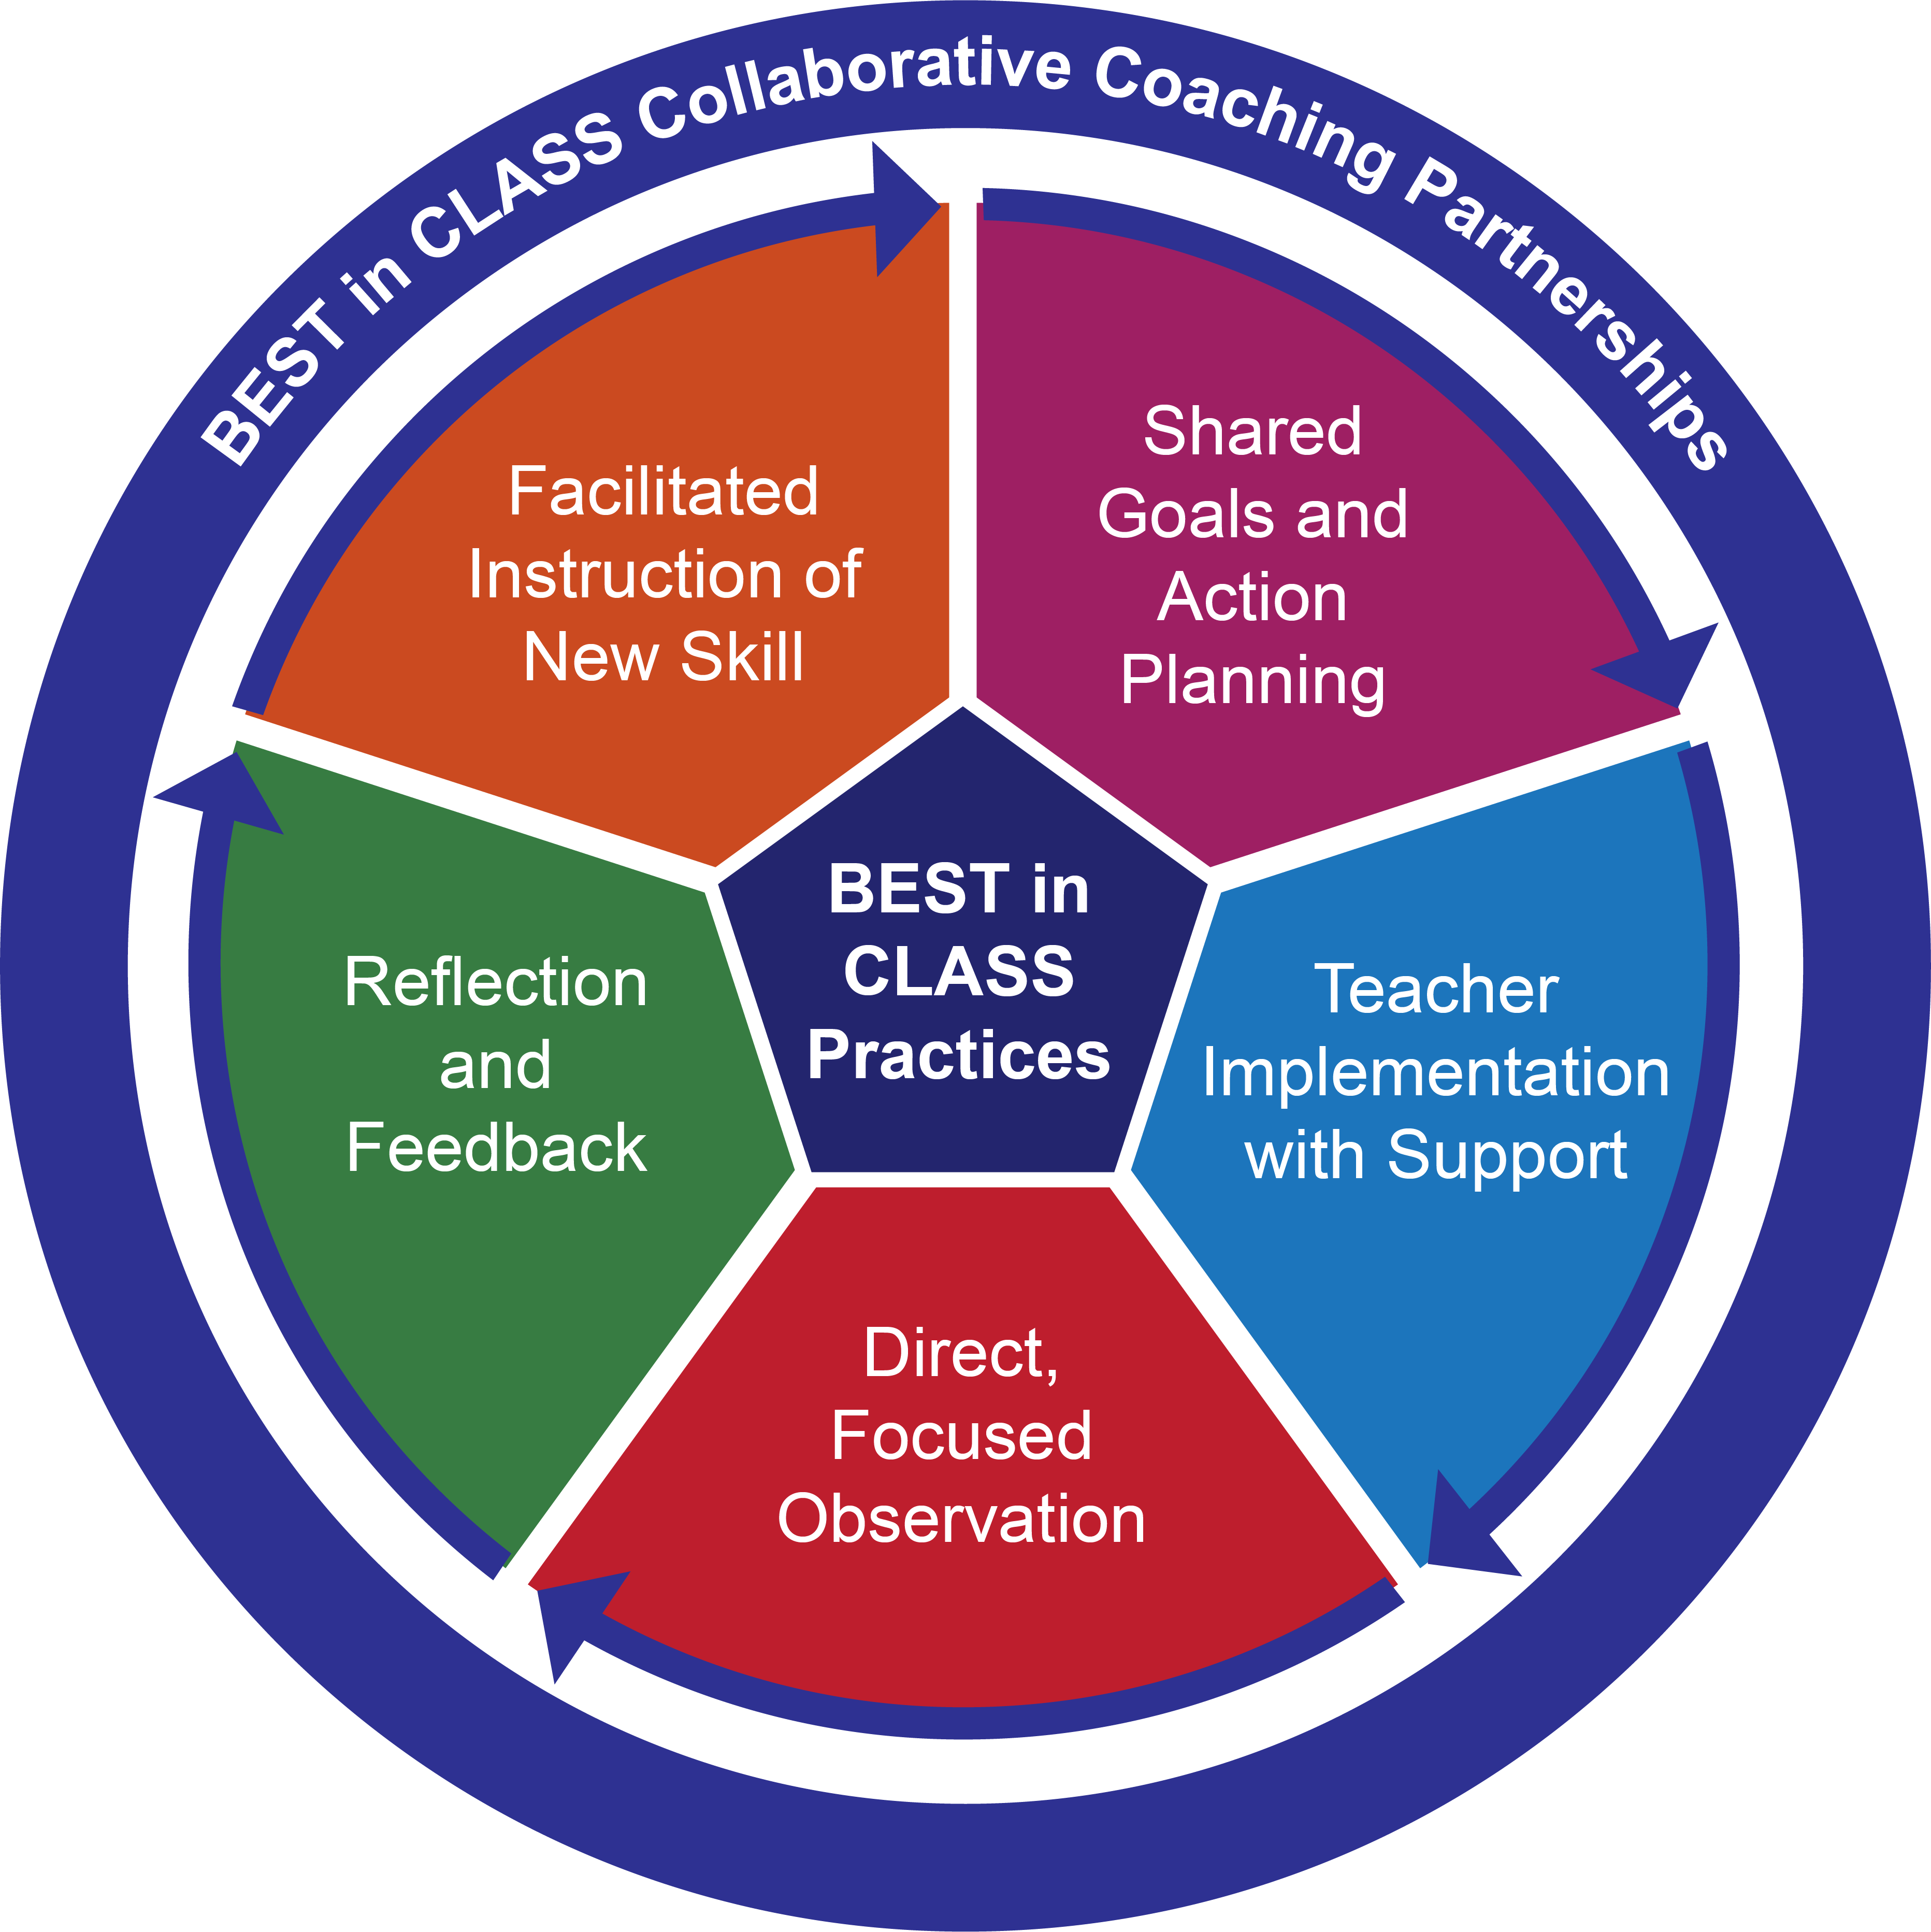 BEST in CLASS Collaborative Coaching Partnership